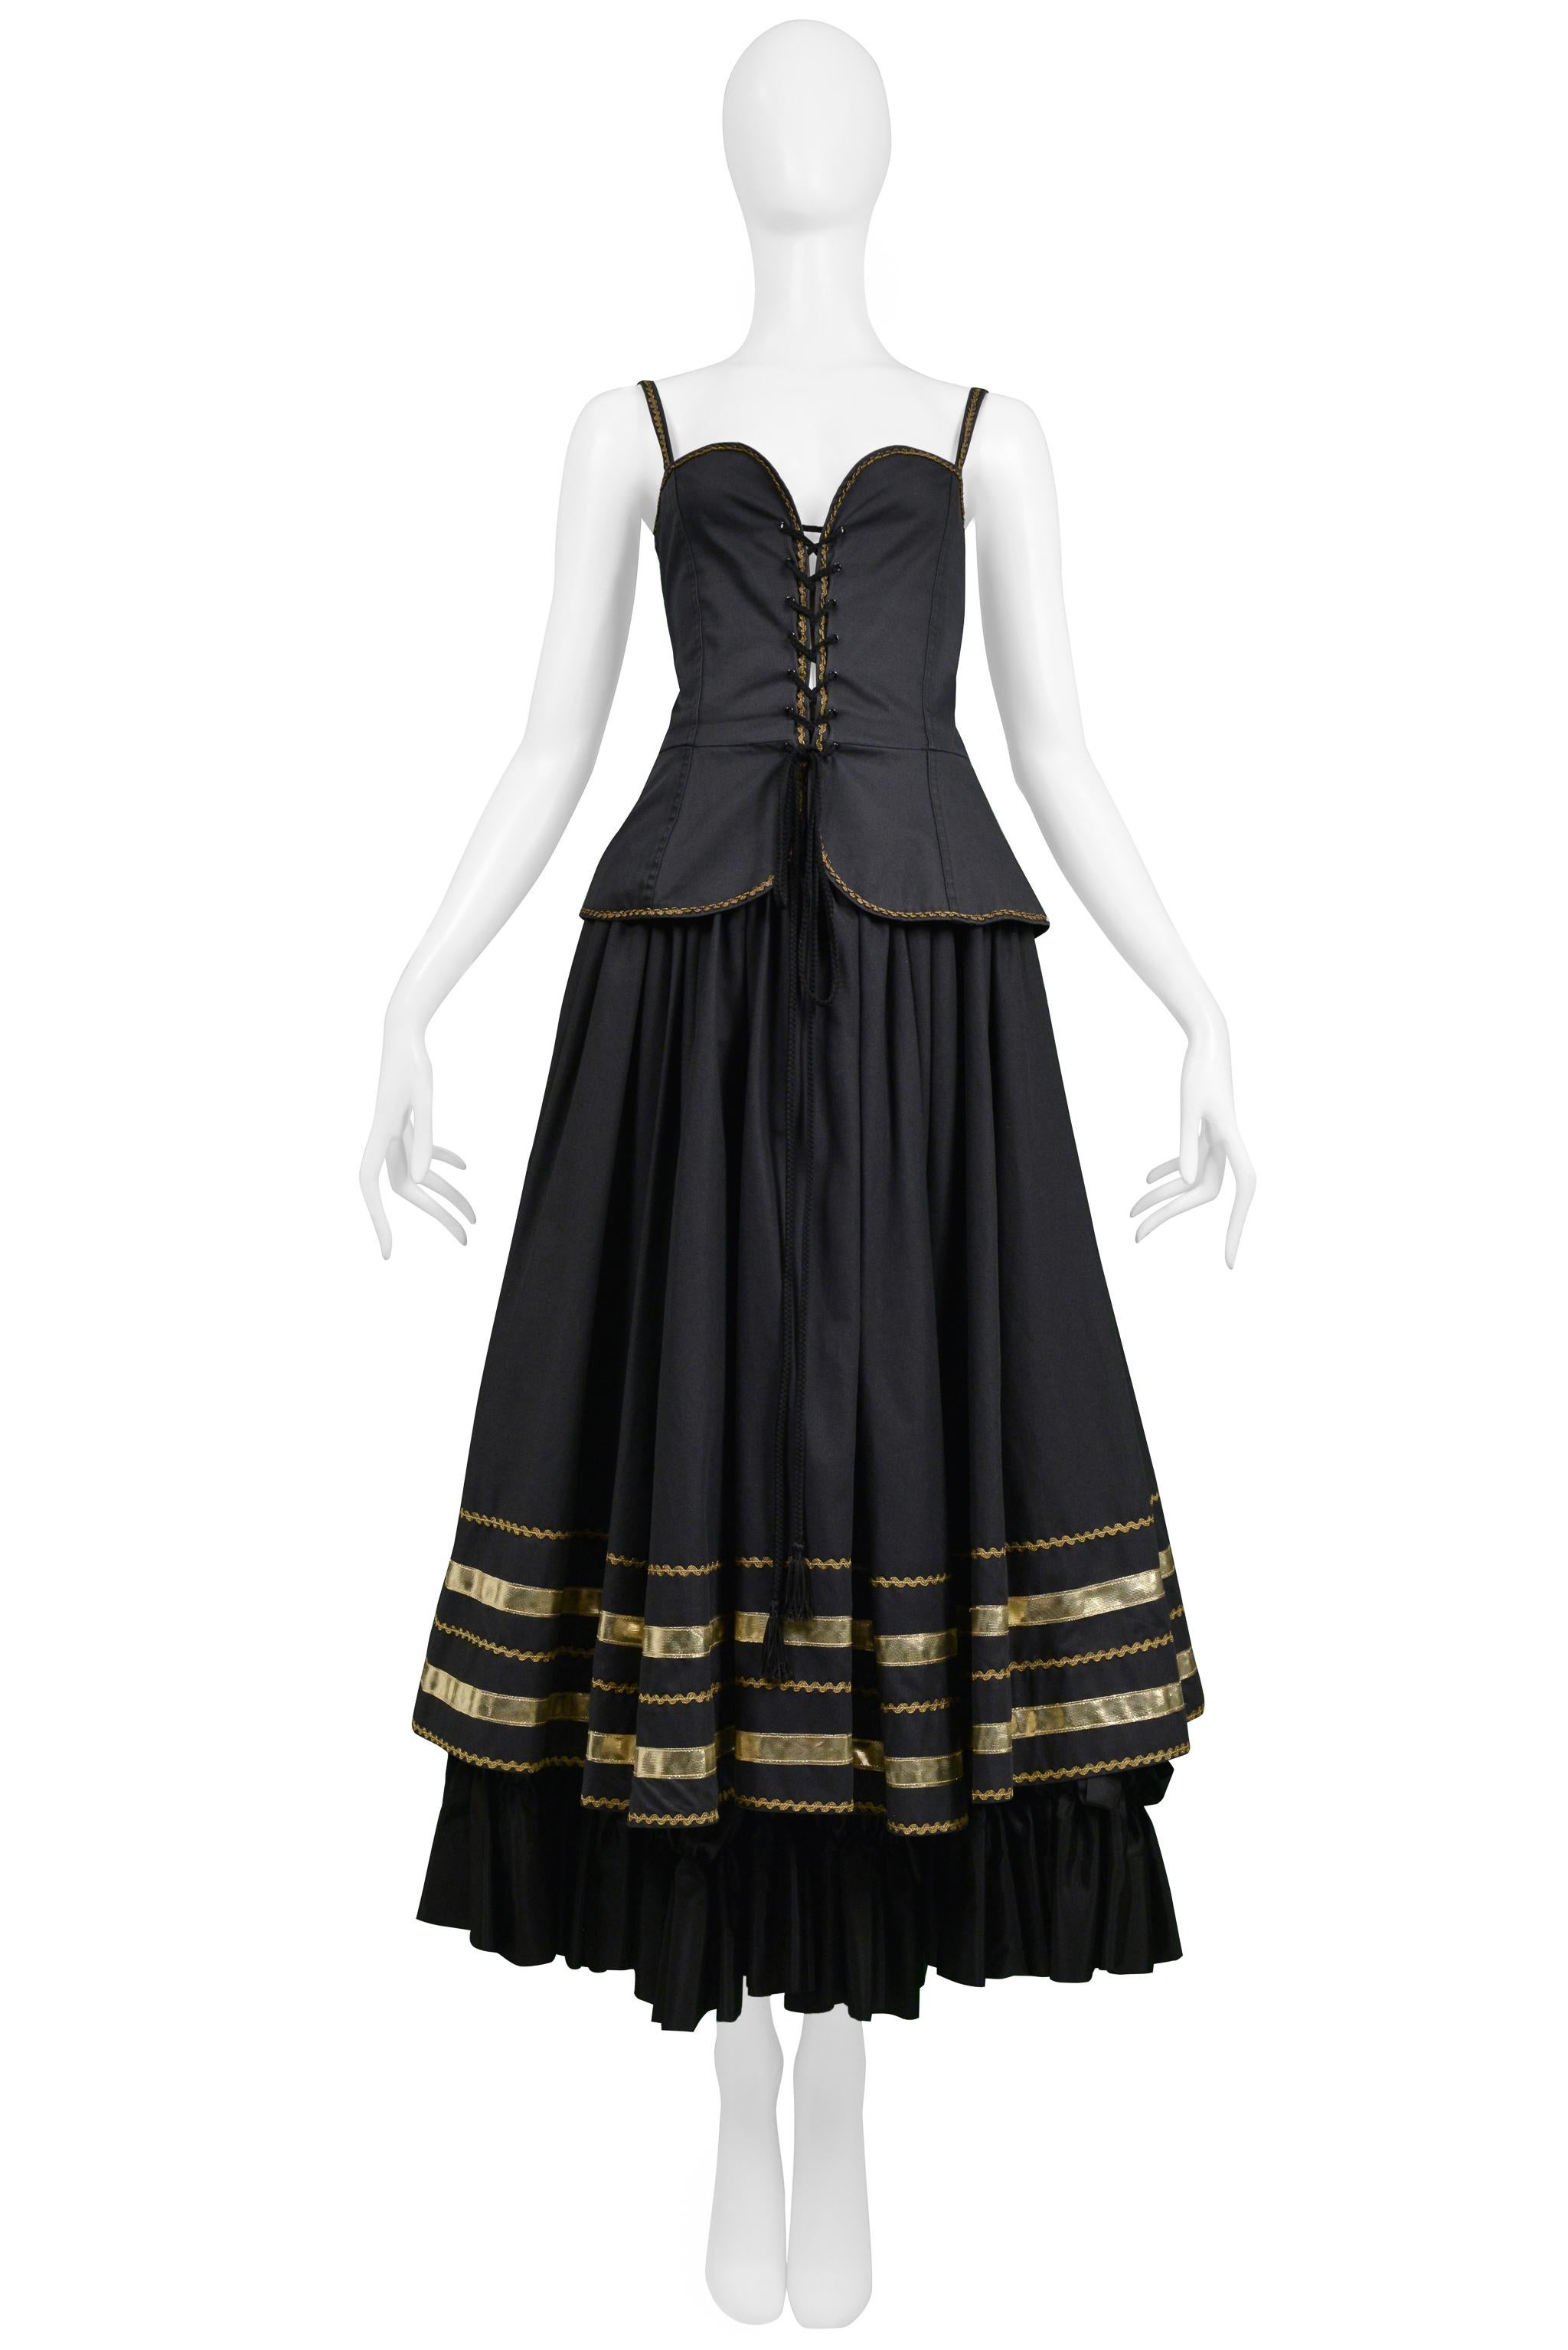 Yves Saint Laurent Ysl Black & Gold Corset Top & Fancy Peasant Skirt 1970s In Good Condition For Sale In Los Angeles, CA